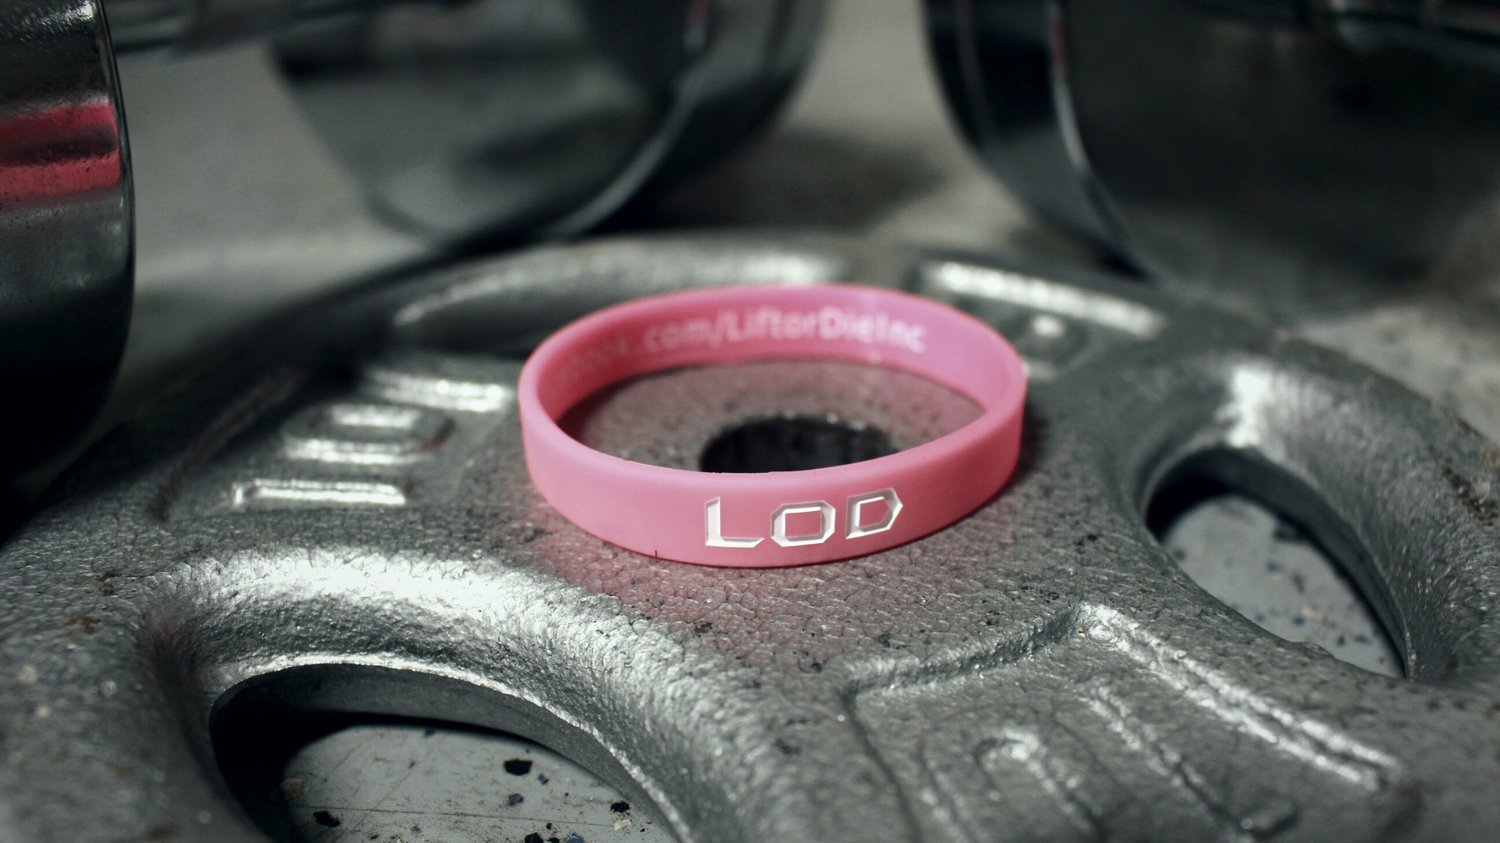 Lift or Die Premium Wrist Bands. Free Shipping!